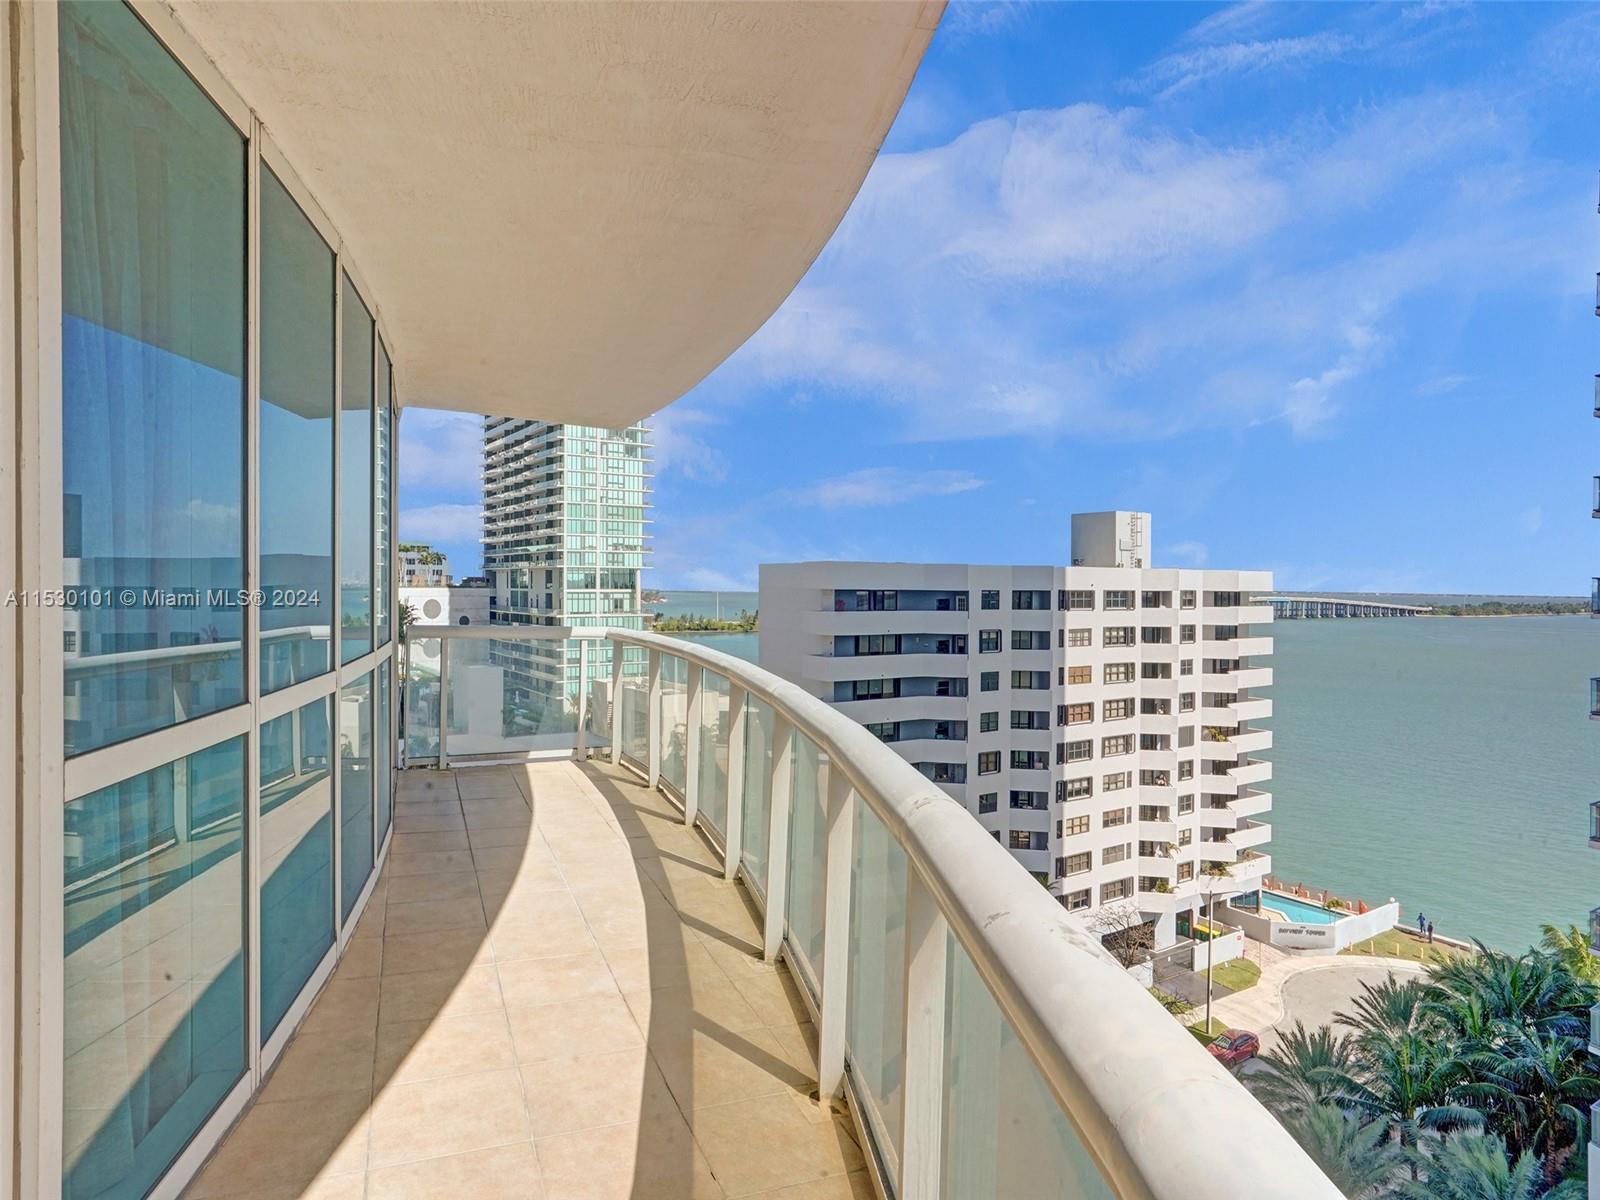 Make this spacious 3/2 condo your new home! Illuminated by natural light, enjoy captivating panoramic views of Biscayne Bay and the city skyline from every corner of this well-designed split-plan layout. Showcasing high ceilings, floor-to-ceiling impact glass windows, a large balcony, a contemporary kitchen with stainless steel appliances, granite countertops, and abundant closet space throughout. Platinum Condominium is situated in the heart of Edgewater, providing full-service amenities such as a heated pool, fitness center, business center, party room, and 24-hour security/doorman. Within walking distance to Midtown, Wynwood, Design District, Trader Joe's, and the new Whole Foods. Also available furnished.